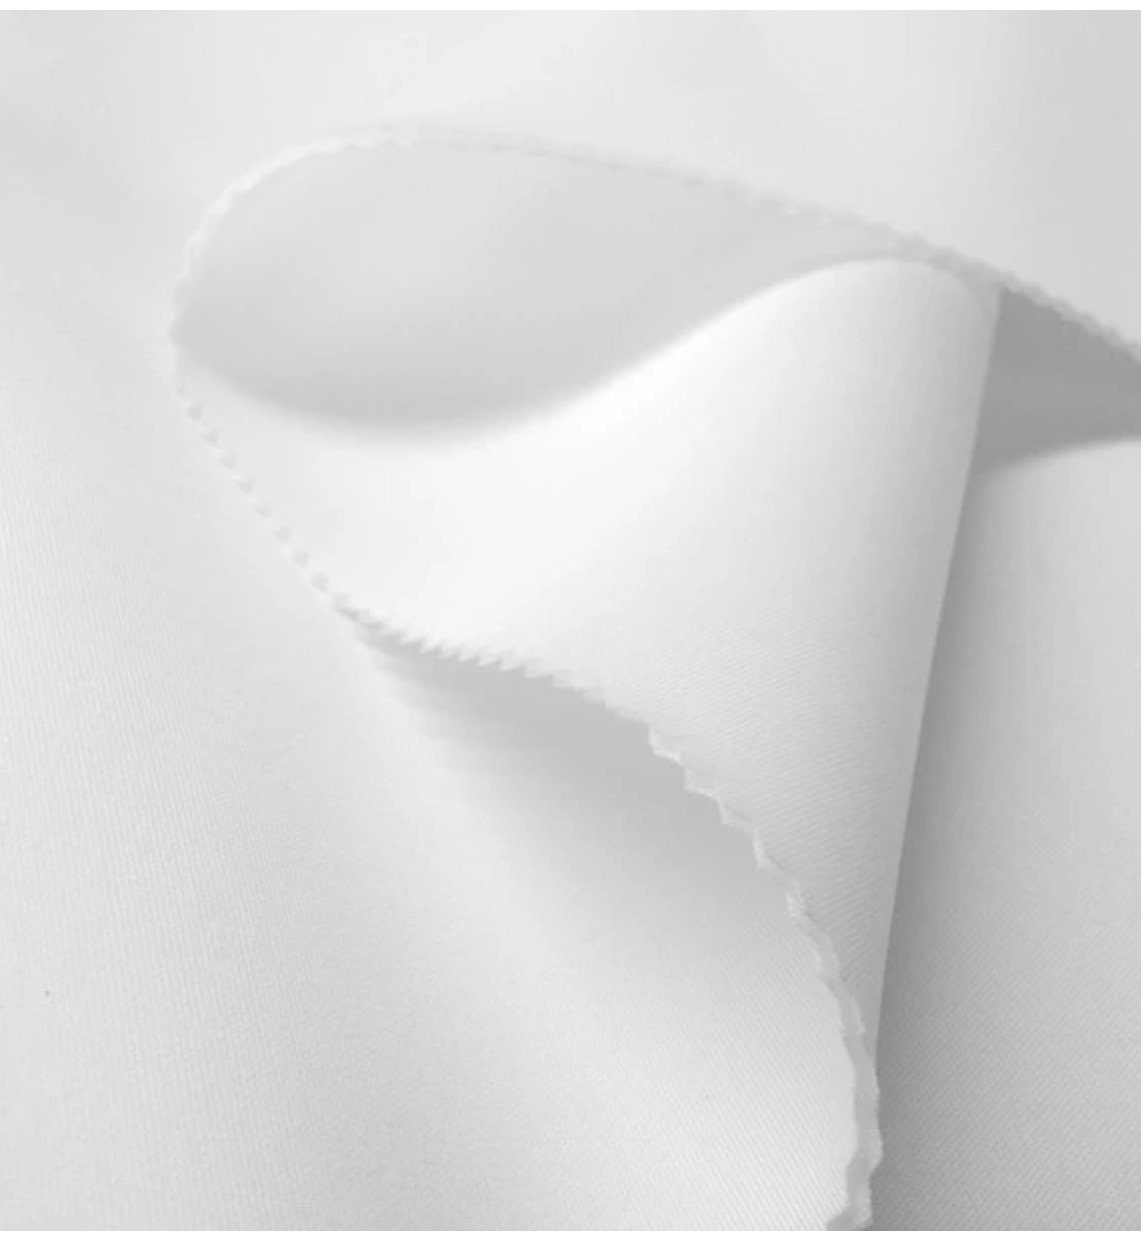  Cotton Blend Broadcloth - 30 Yard Bolt Fabric White-501